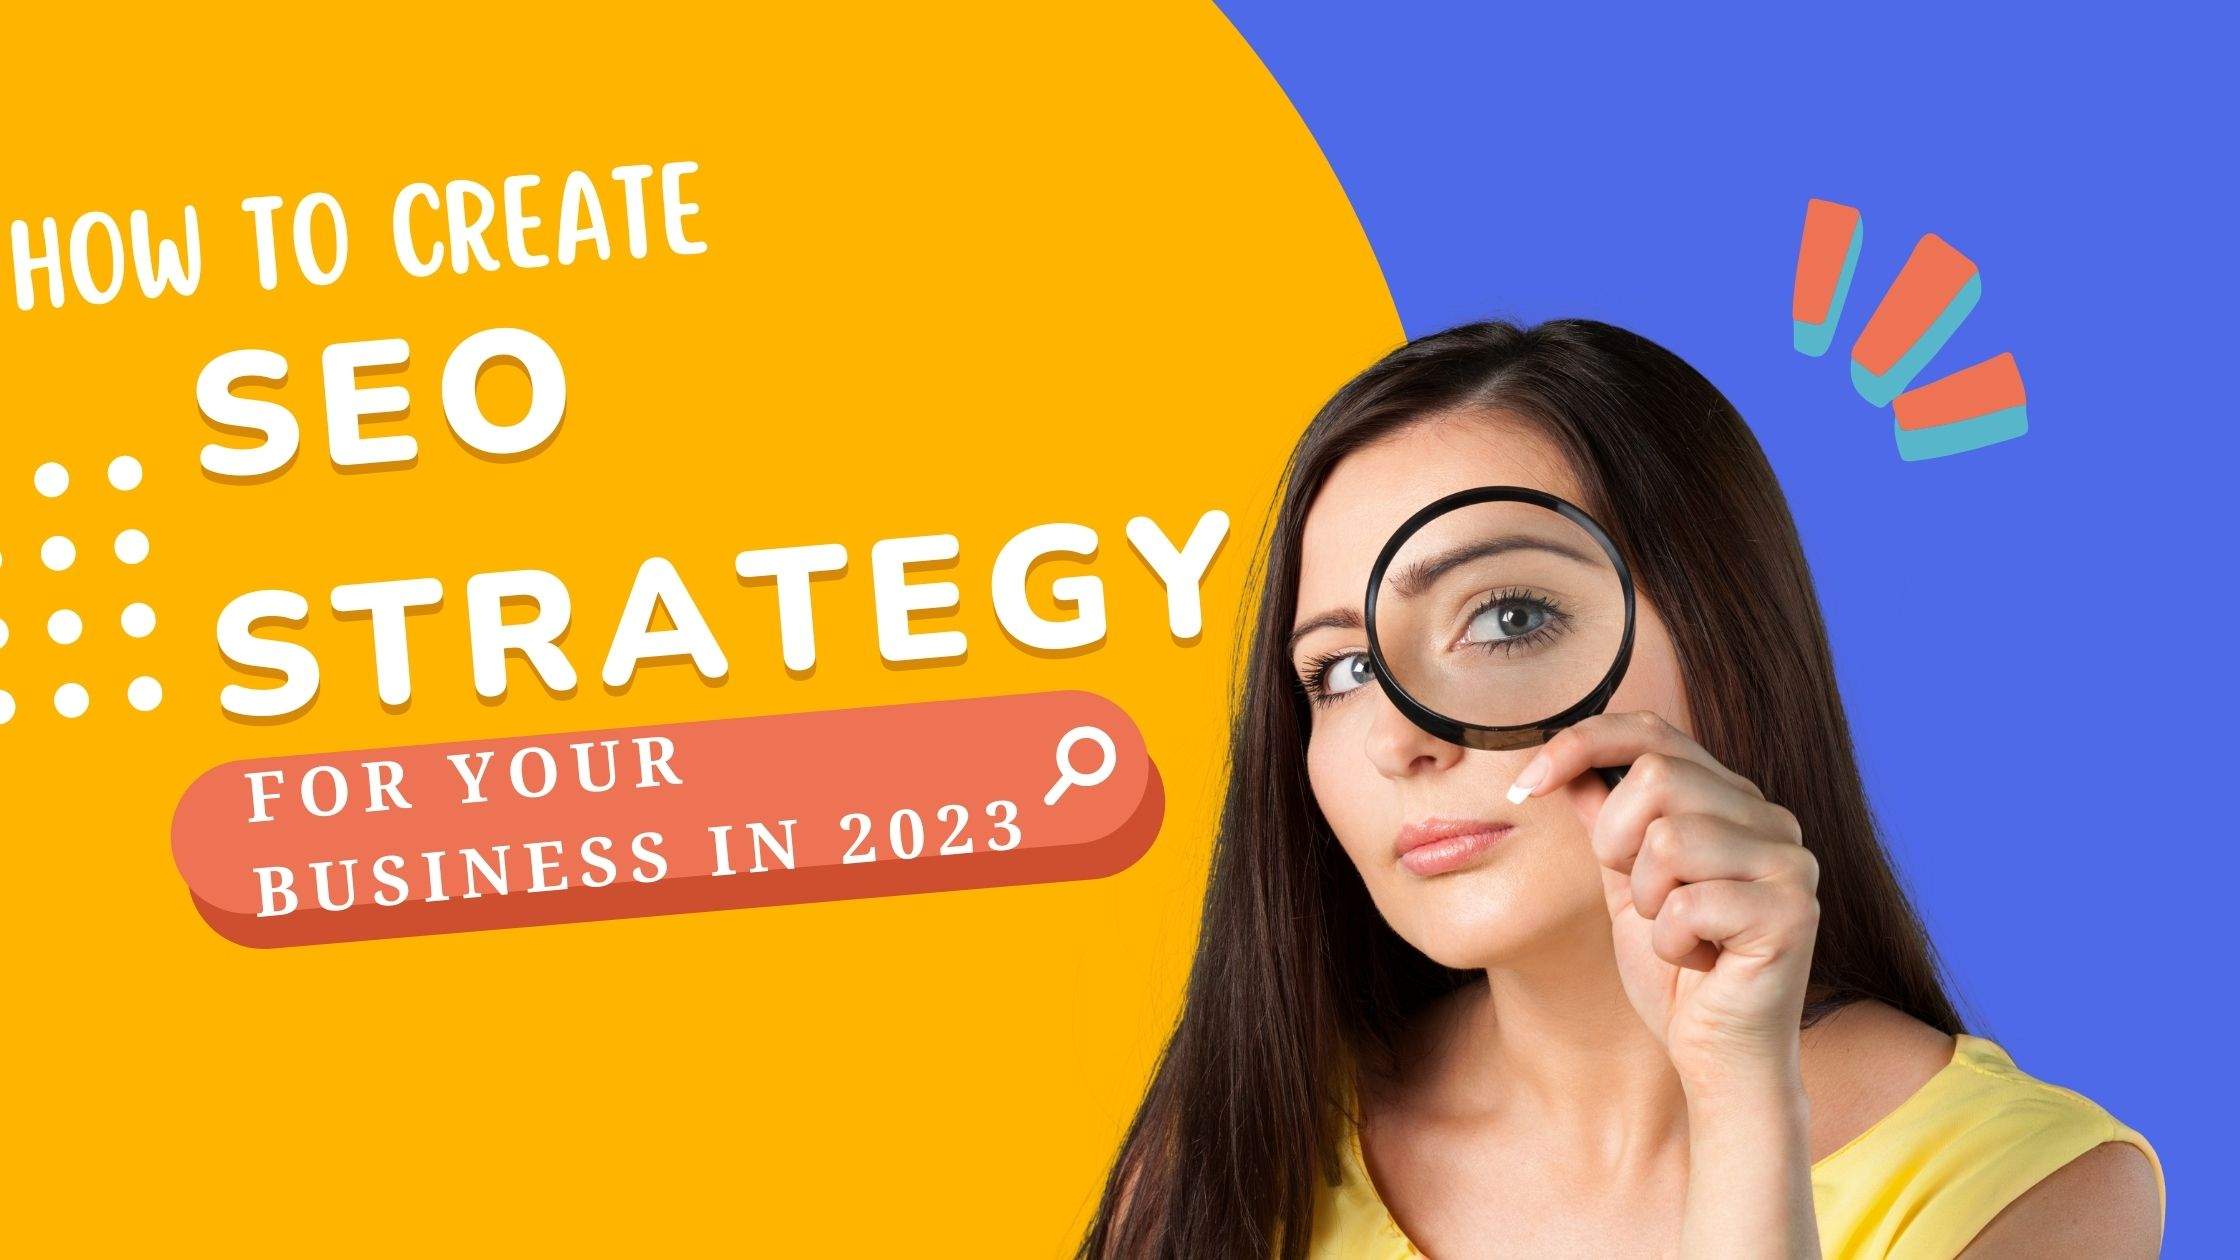 How to Create an SEO Strategy for Your Business in 2023